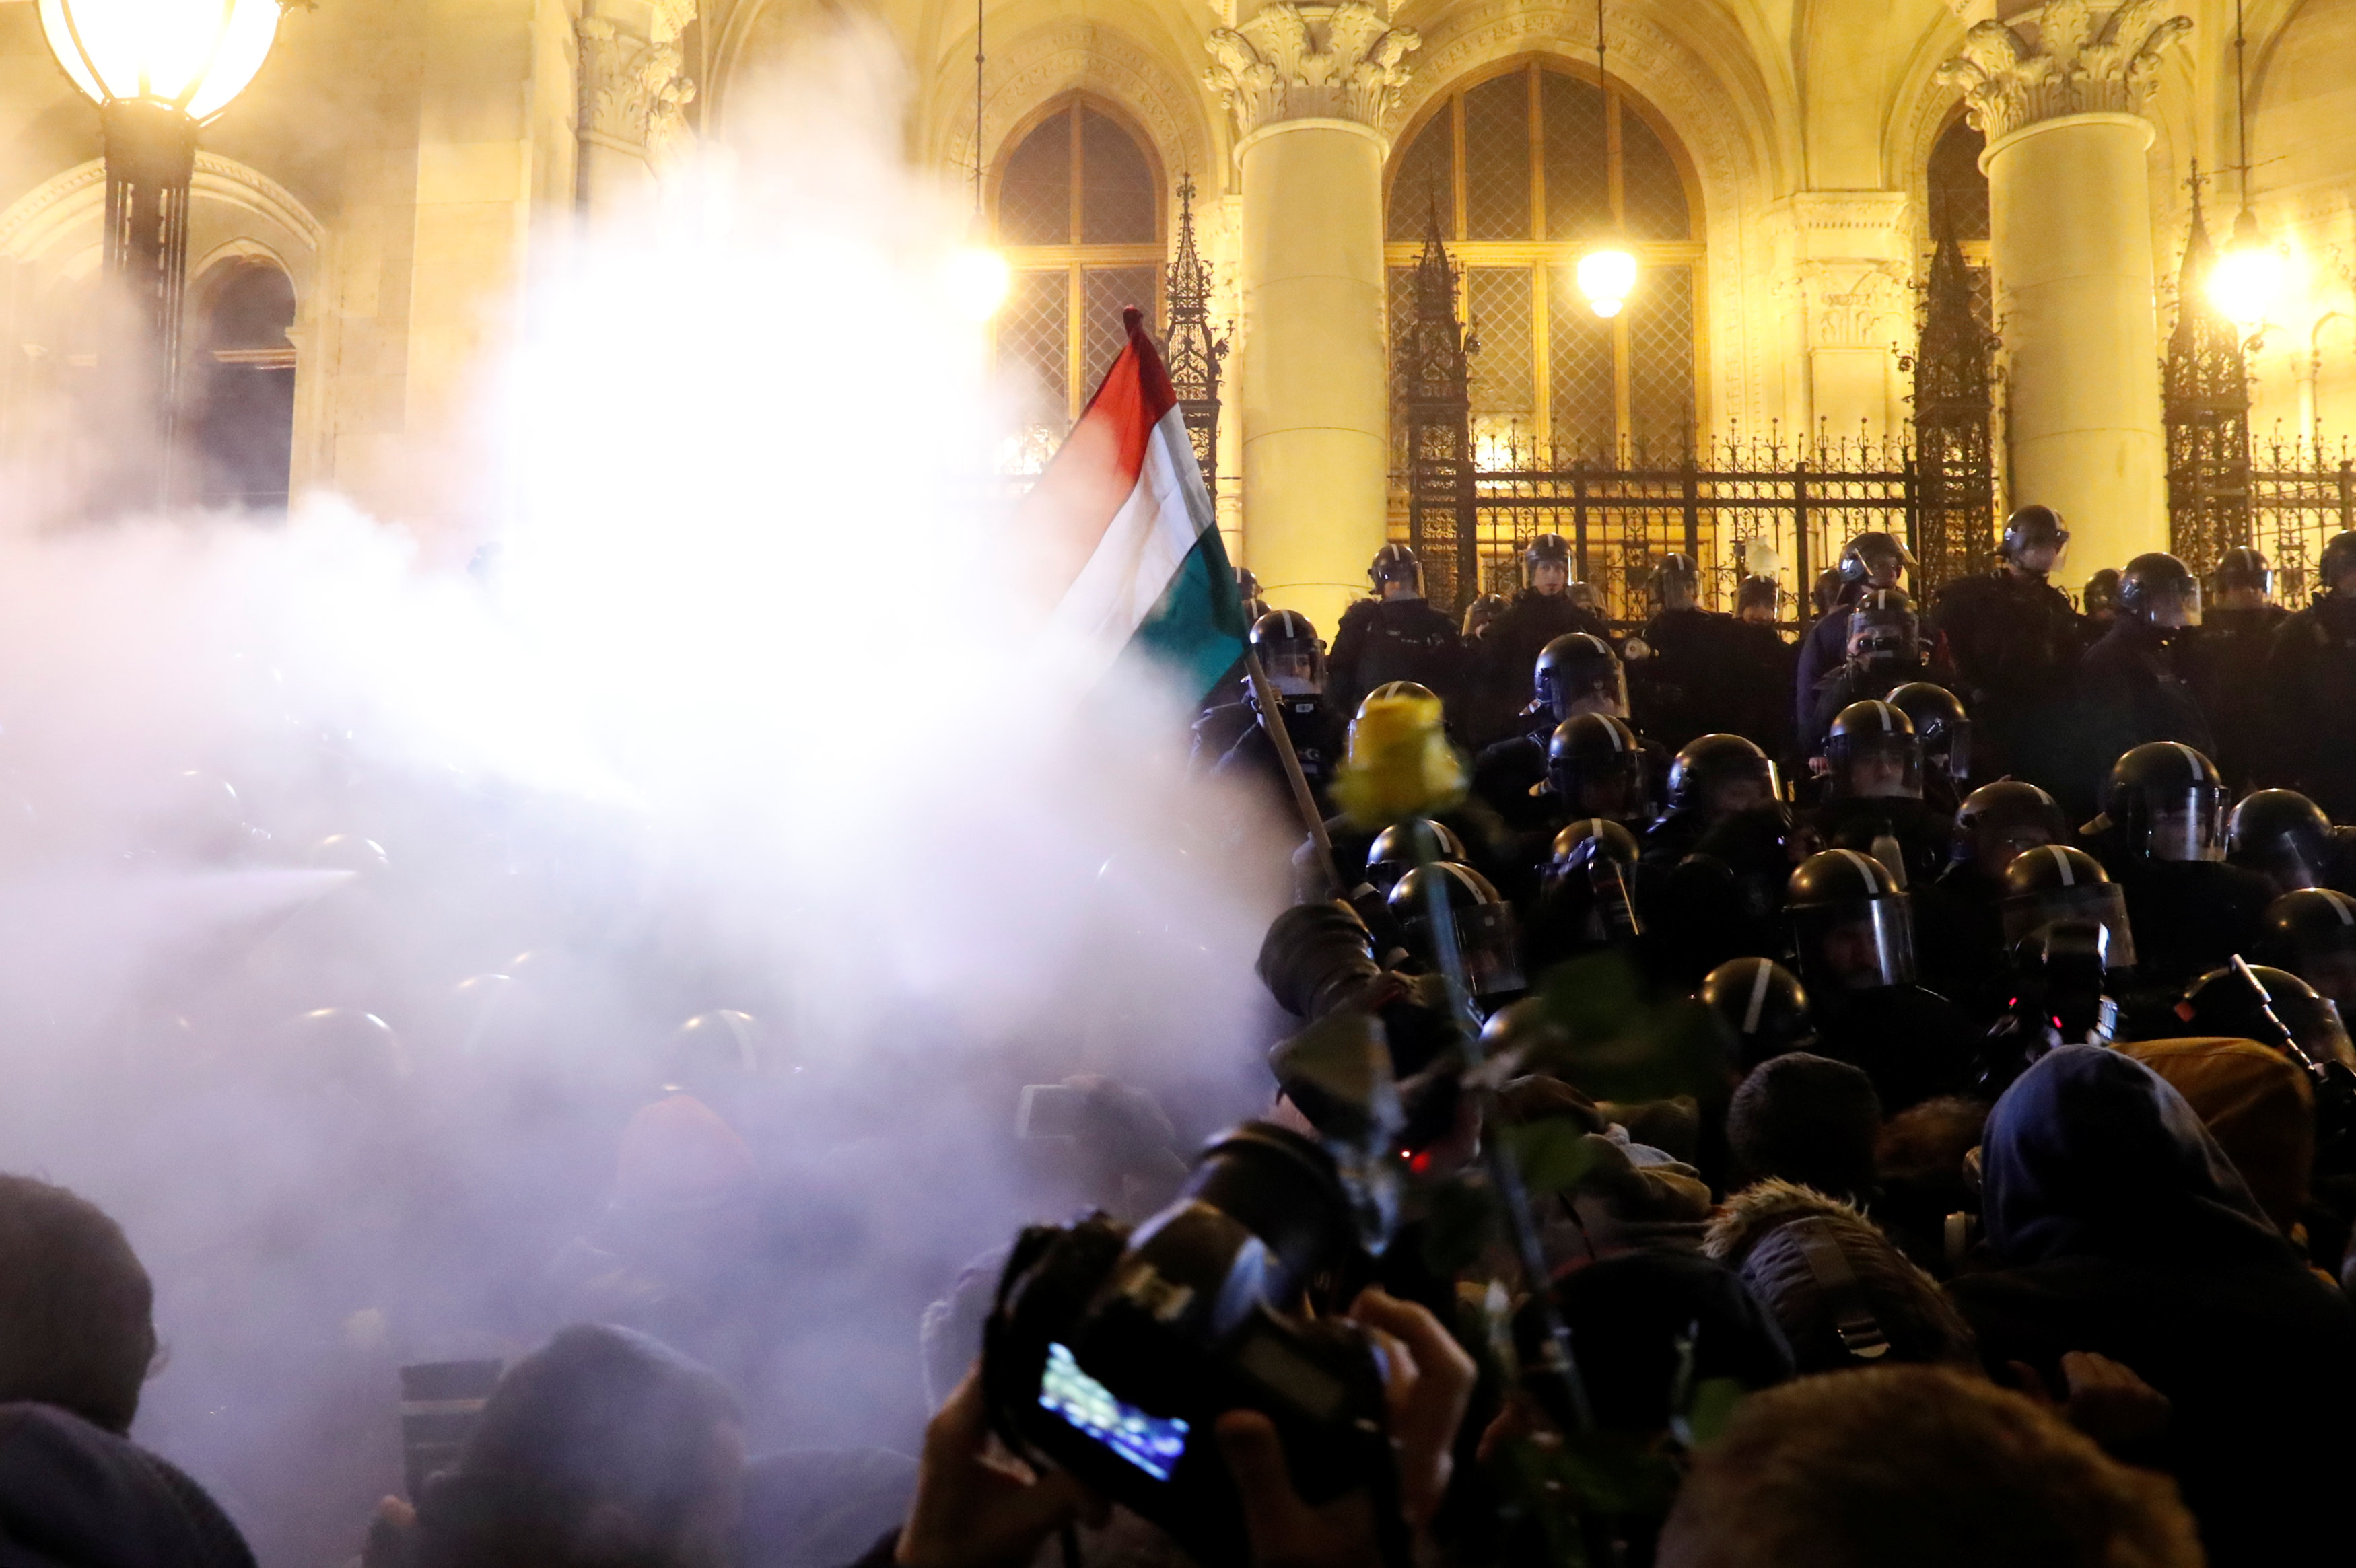 2018-12-13T202028Z_256083934_RC15D0705D60_RTRMADP_3_HUNGARY-PROTESTS